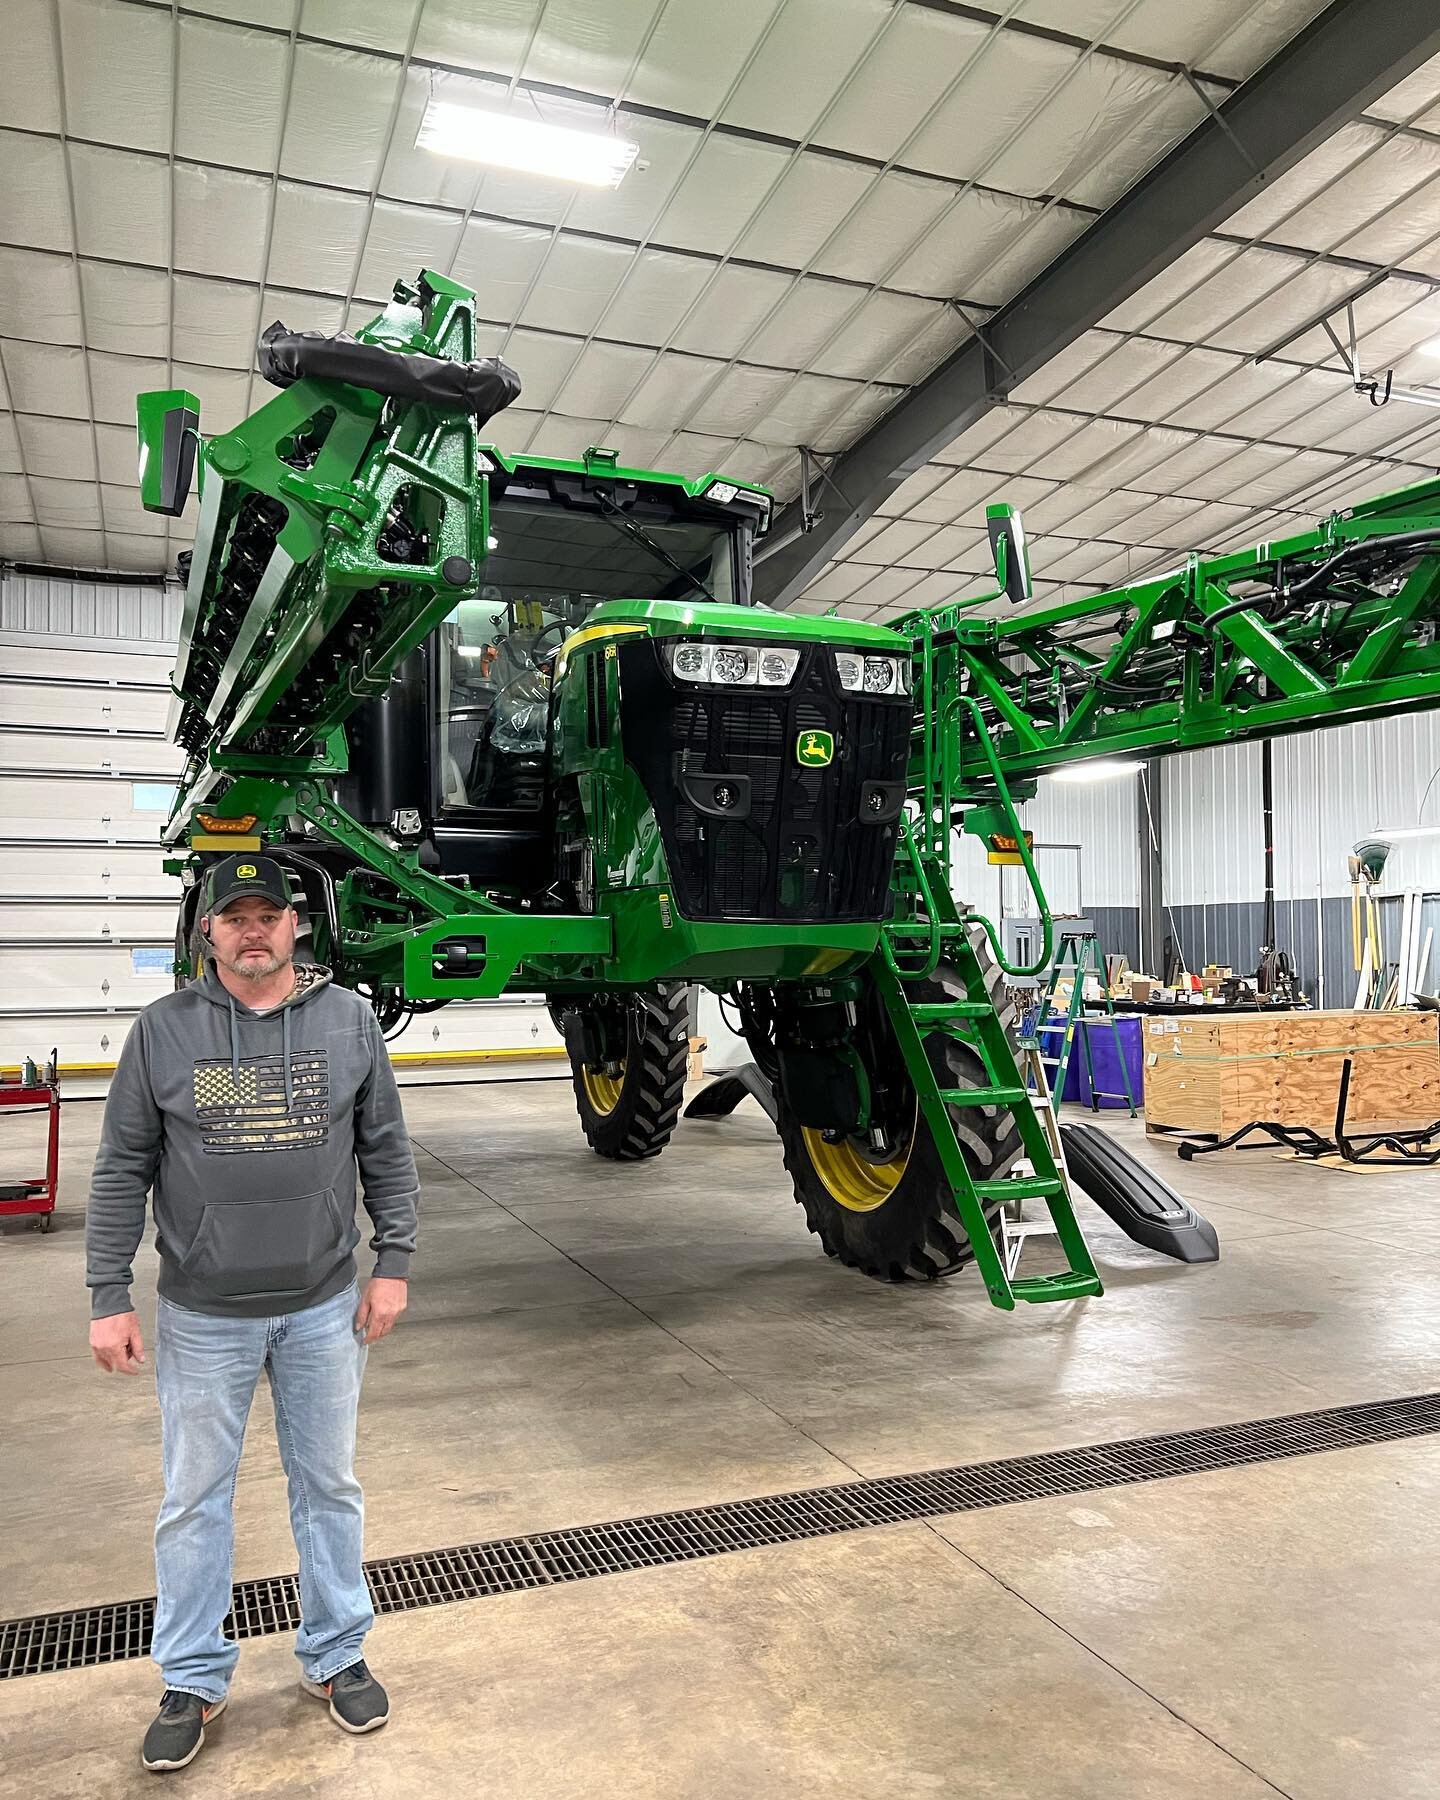 Rainy days call for working inside! Meet Rodney Stockwell. He&rsquo;s one of our farmhands and today he&rsquo;ll be prepping our sprayer for the upcoming season. Rodney has been a part of our team for 6 years.☺️ When asked why he enjoys working at Be